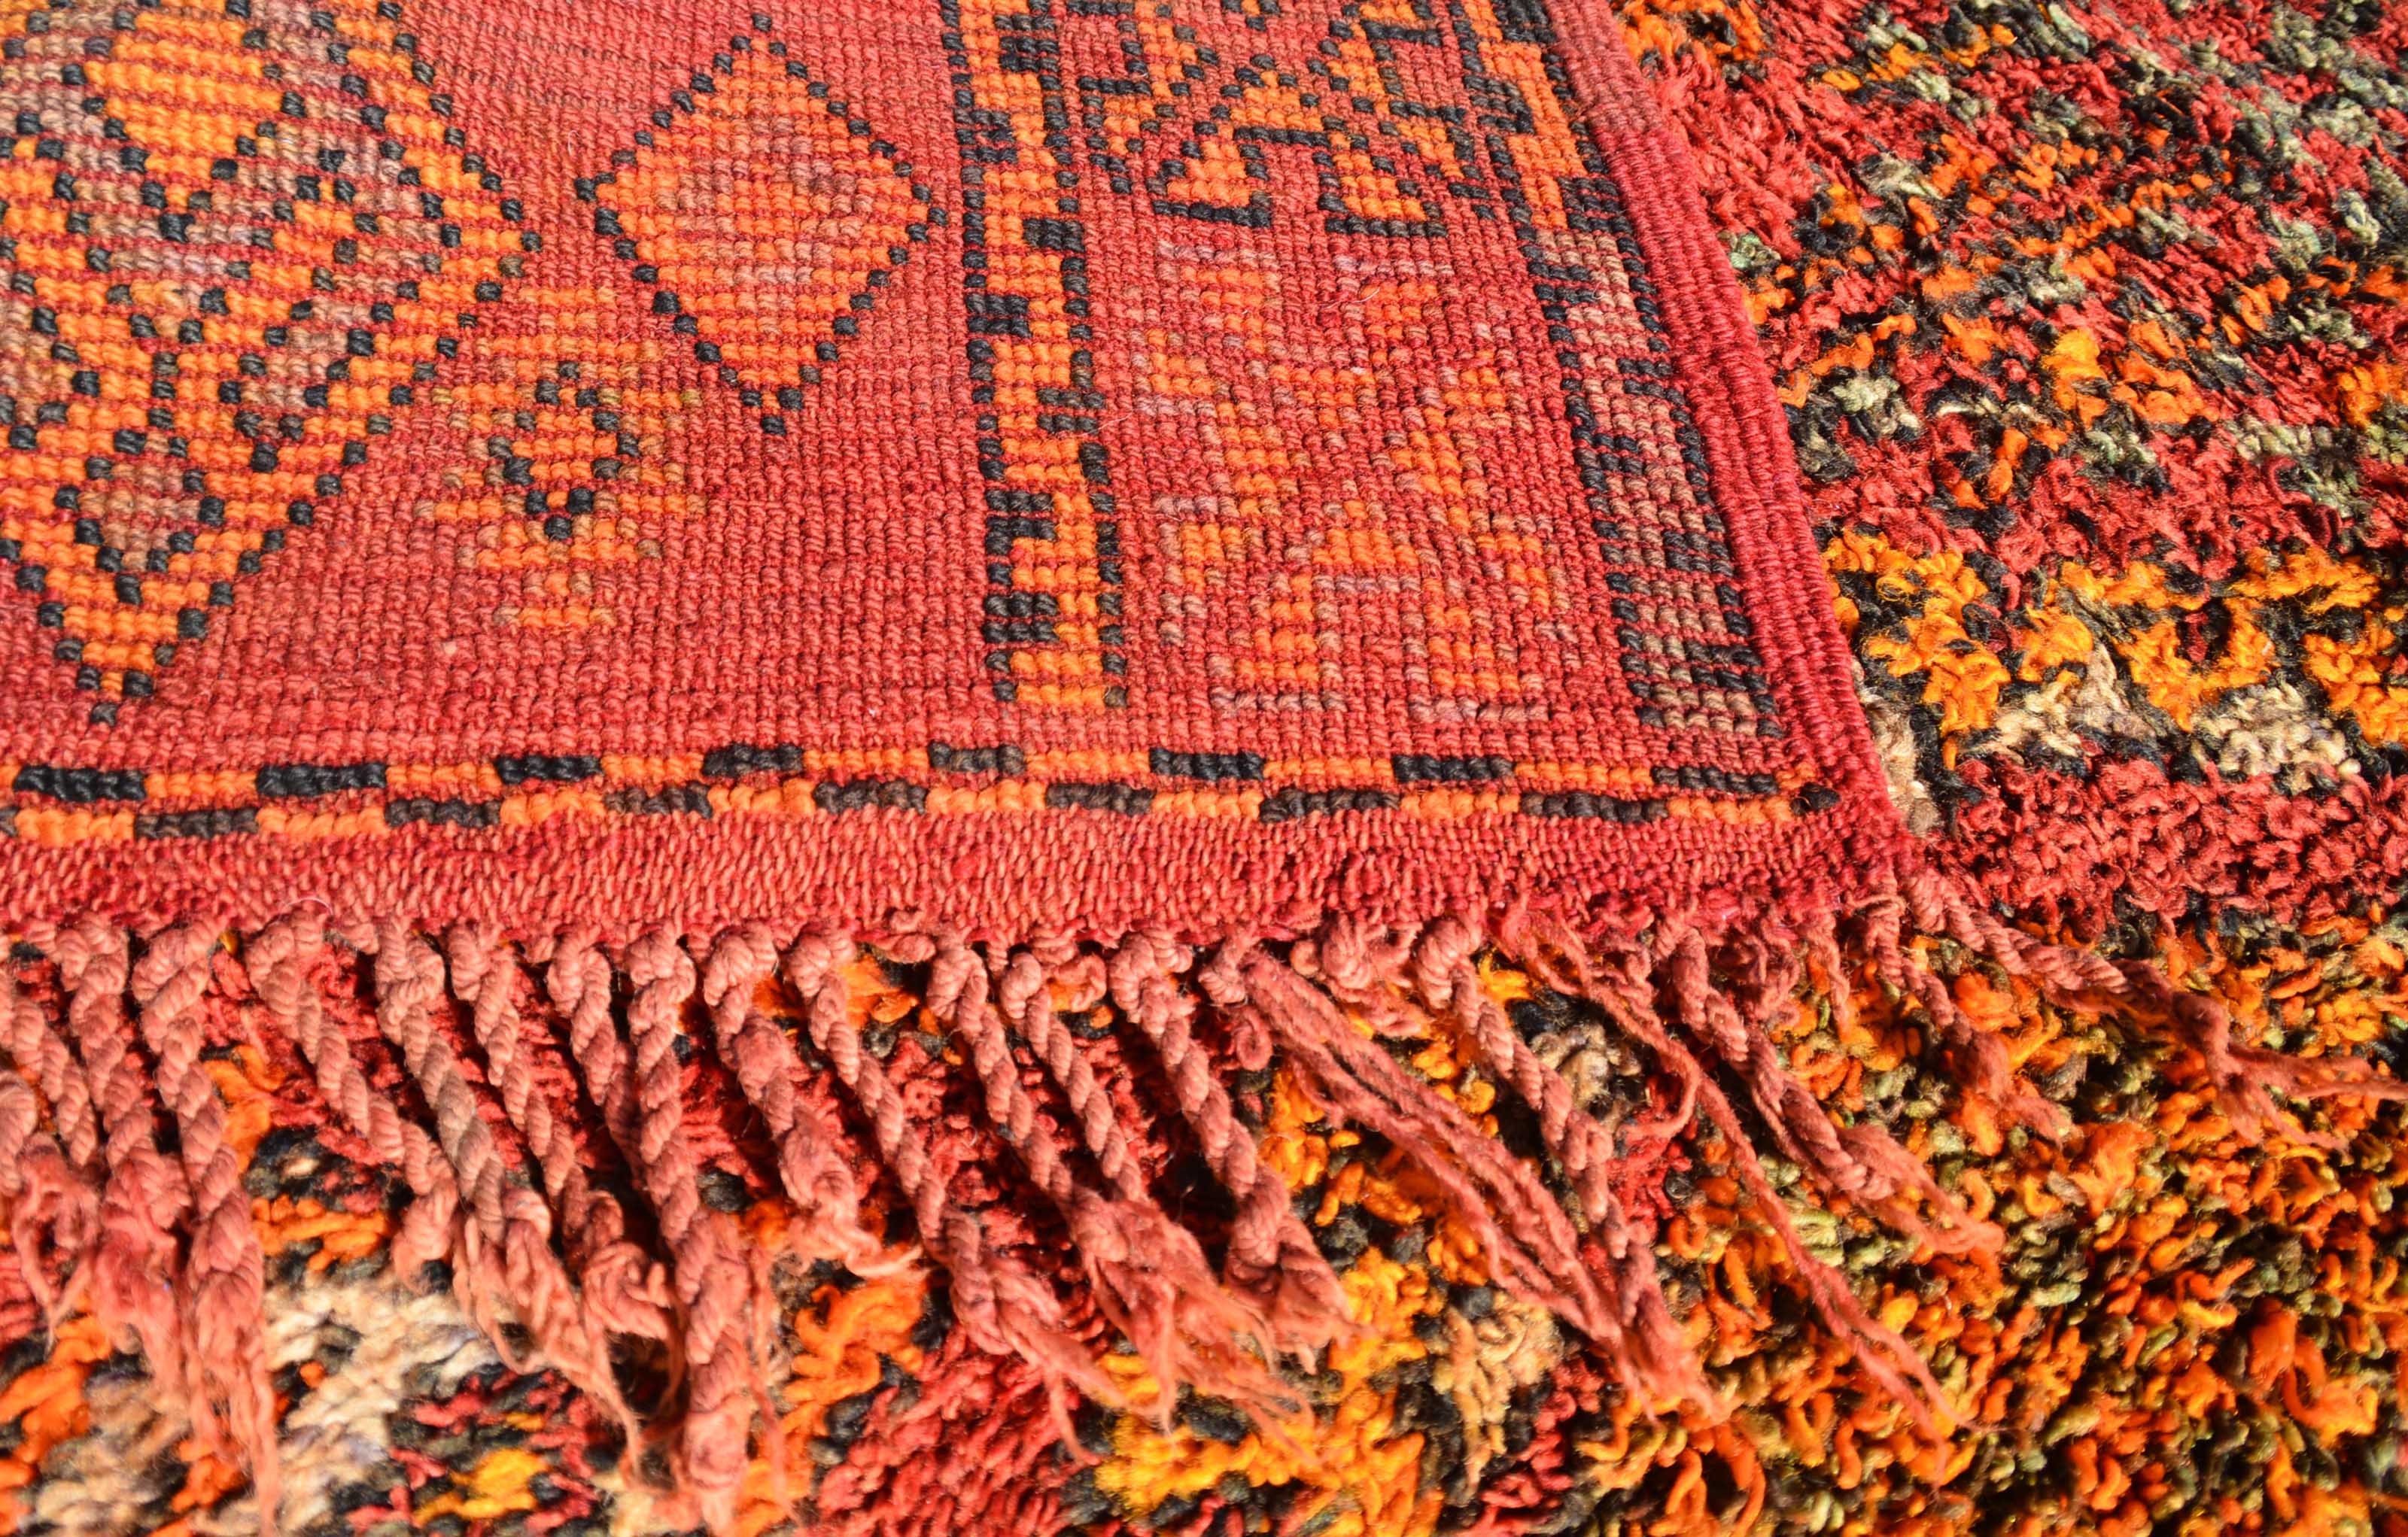 Vintage Moroccan Rug  Red Vintage Rug - Vintage Wool Rugs - Illuminate Collective illuminate collective